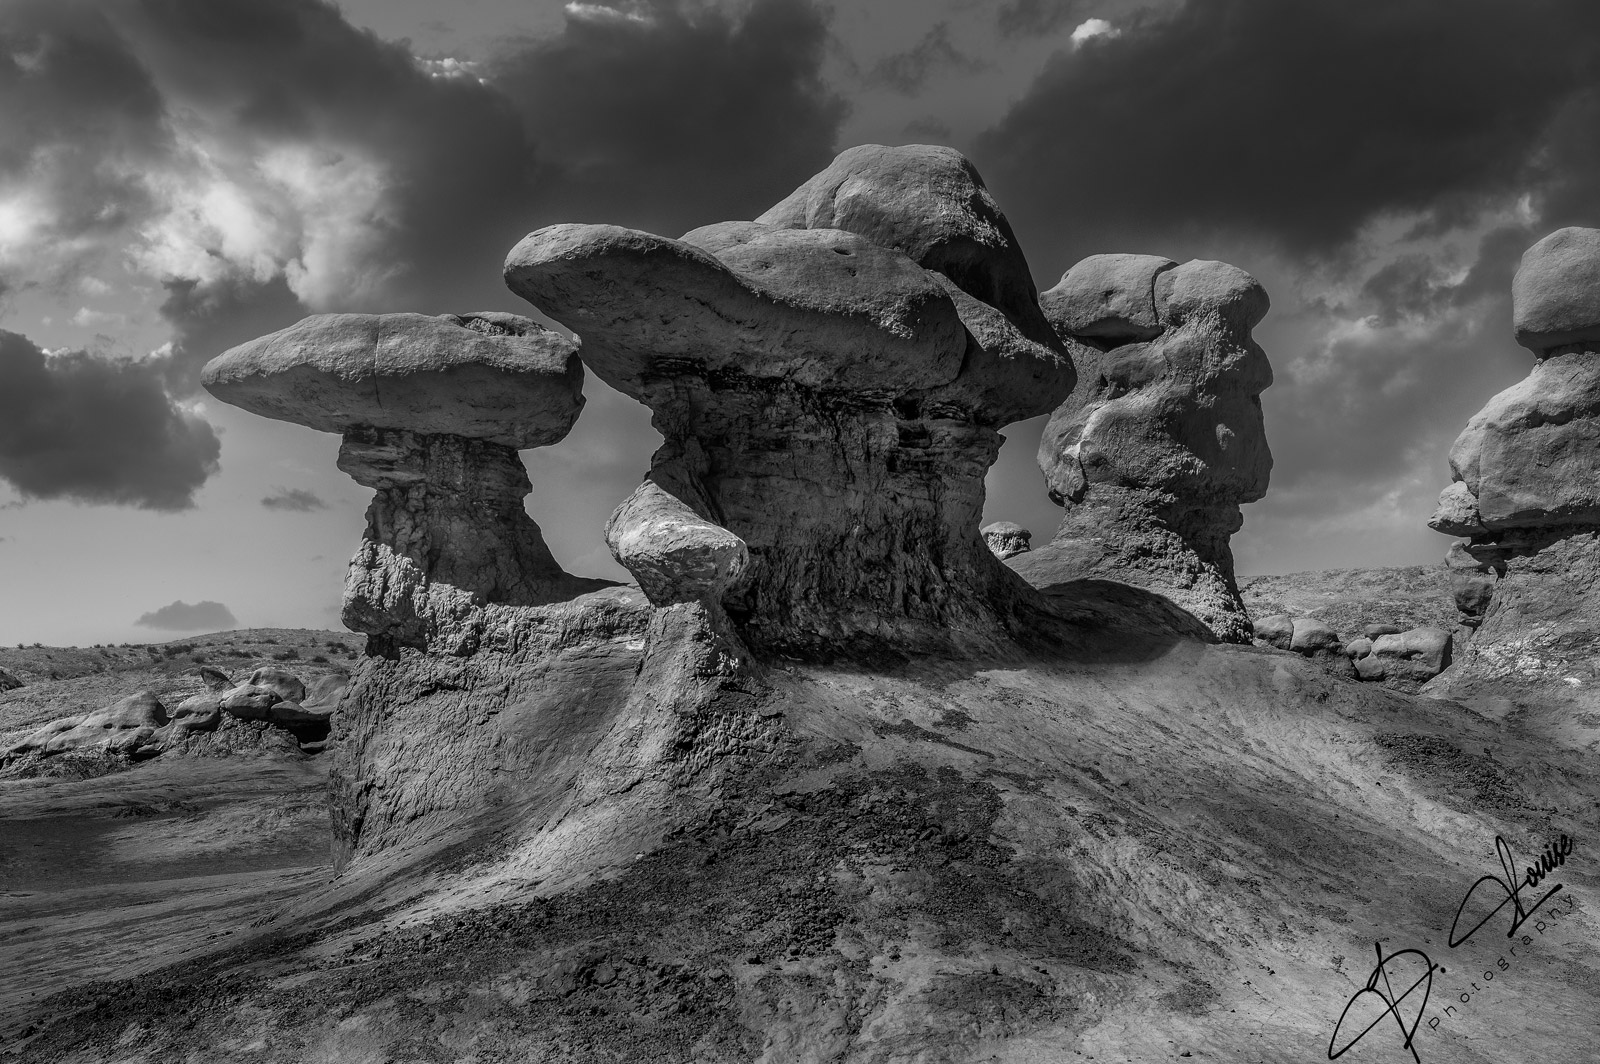 Sandstone hoodoos take on some interesting shapes. Utah's Goblin Valley has many of these unique natural features